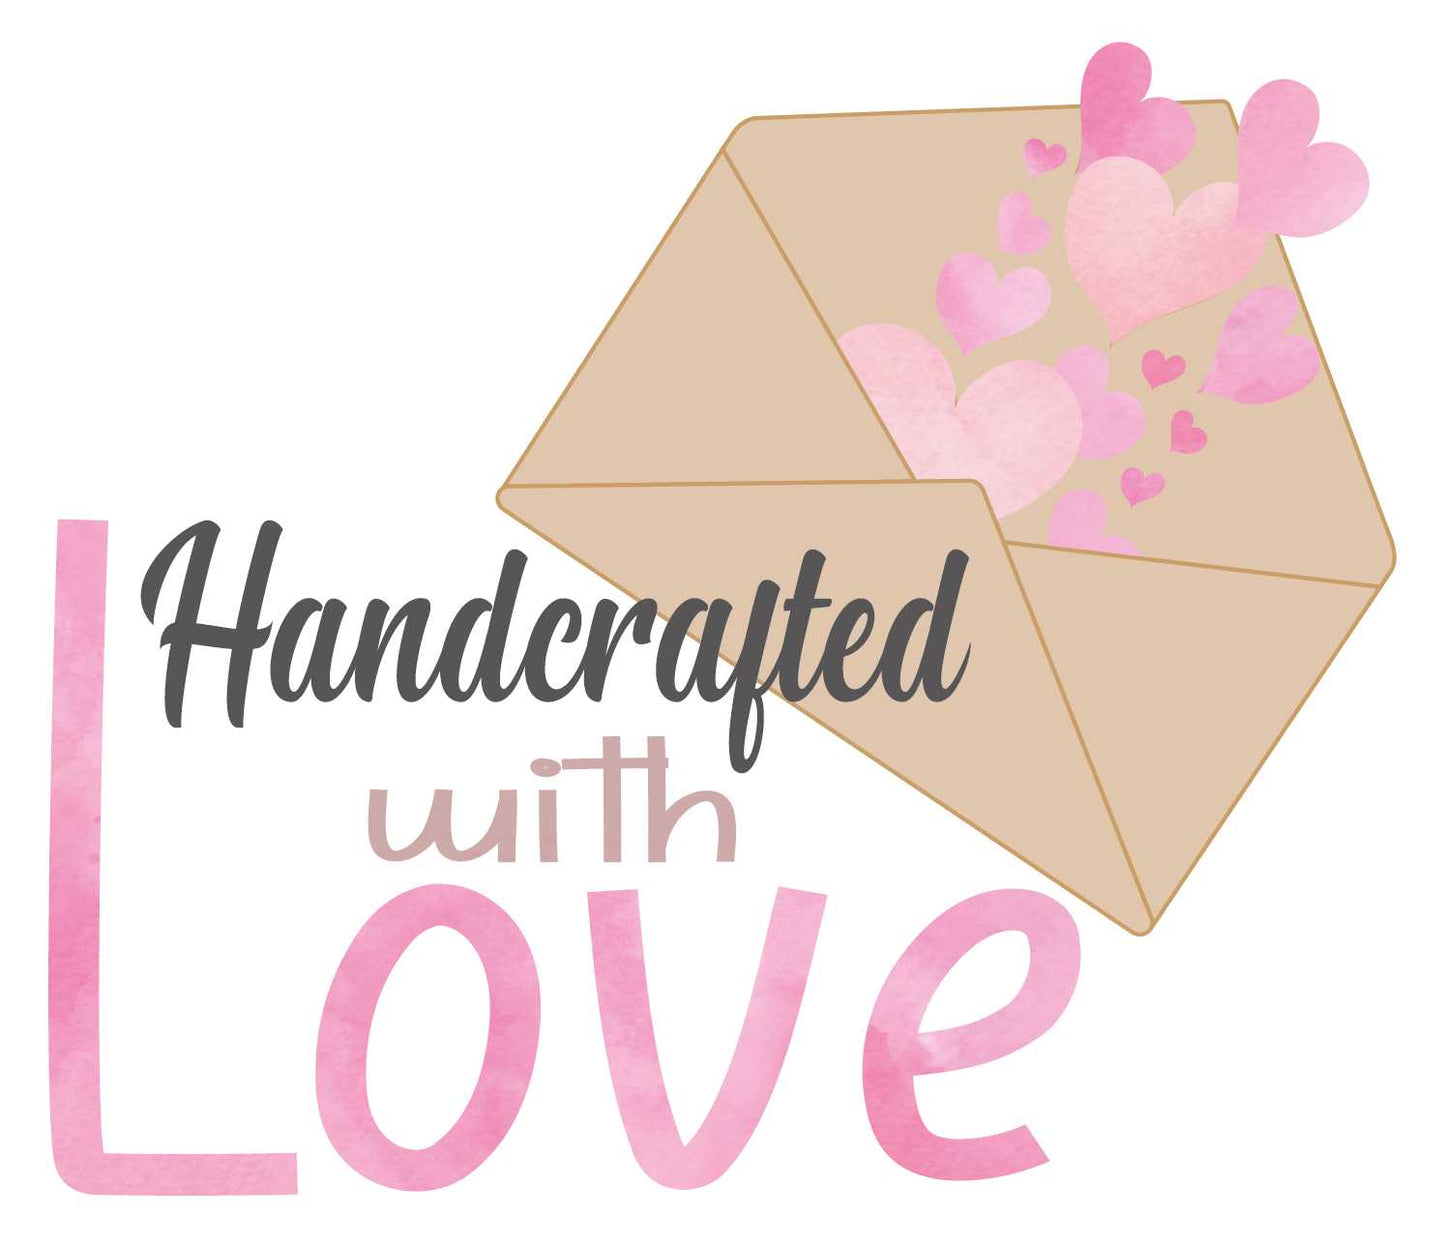 Packaging Box Letter Stickers Paper Love Cards